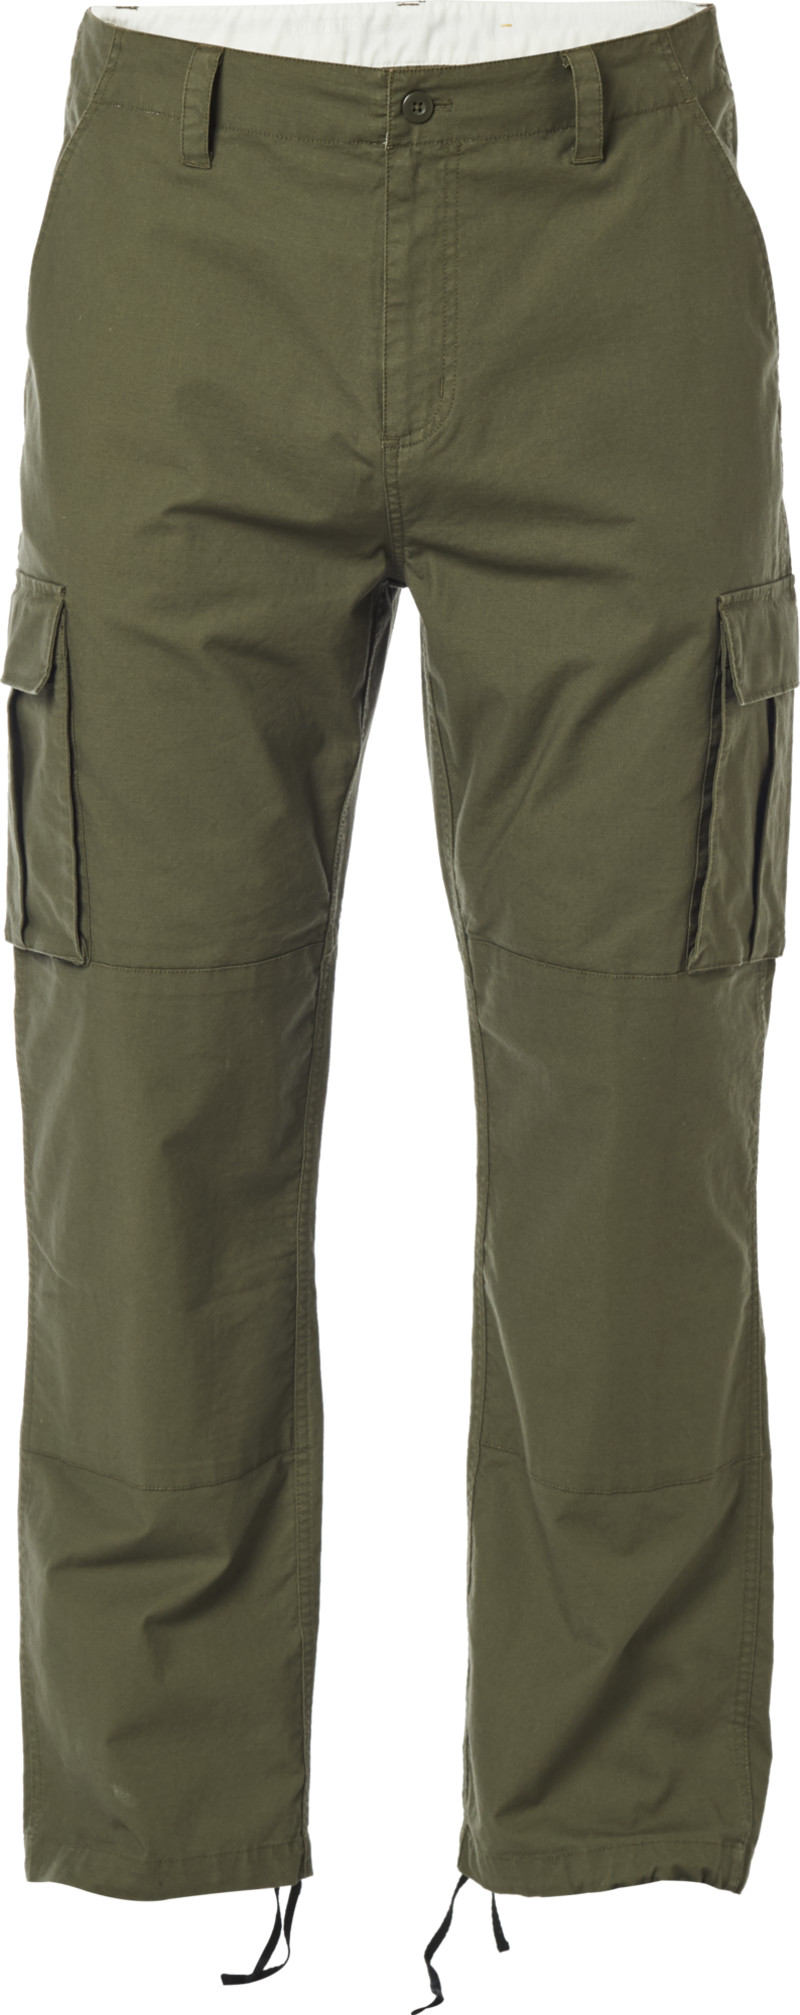 fox racing pants  recon stretch cargo pants - casual